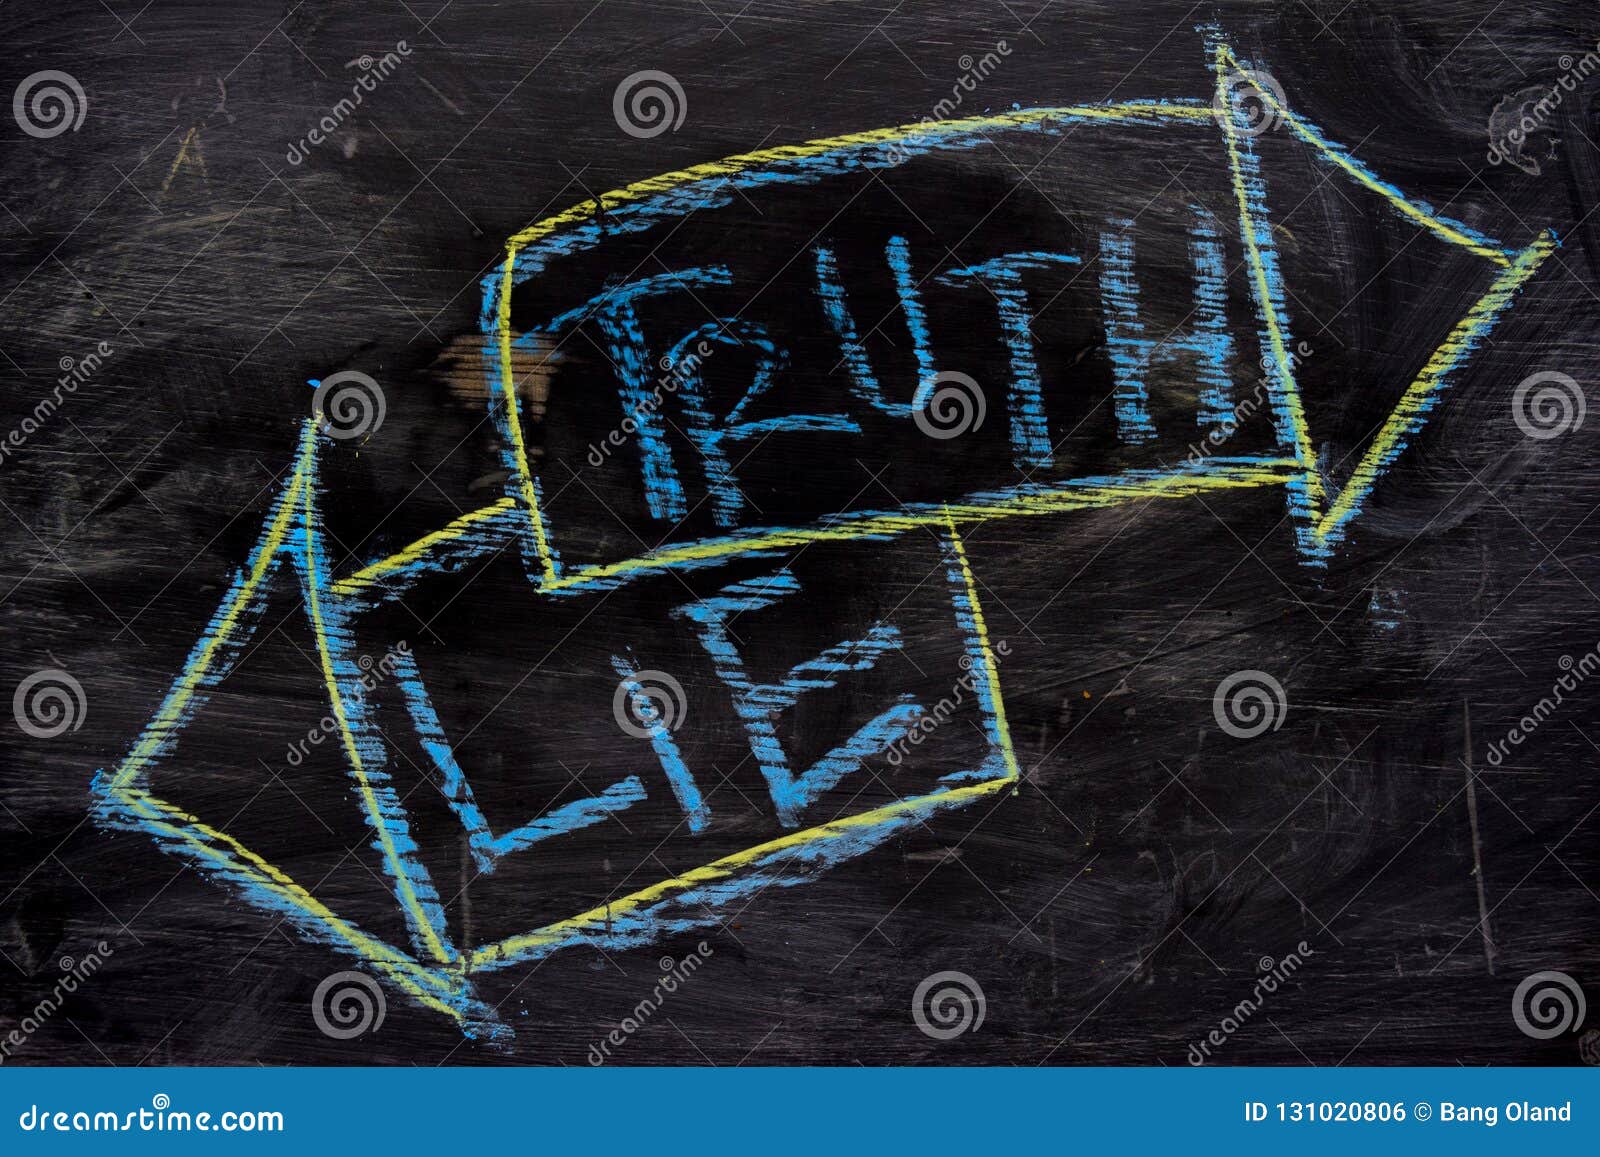 truth or lie written with color chalk concept on the blackboard